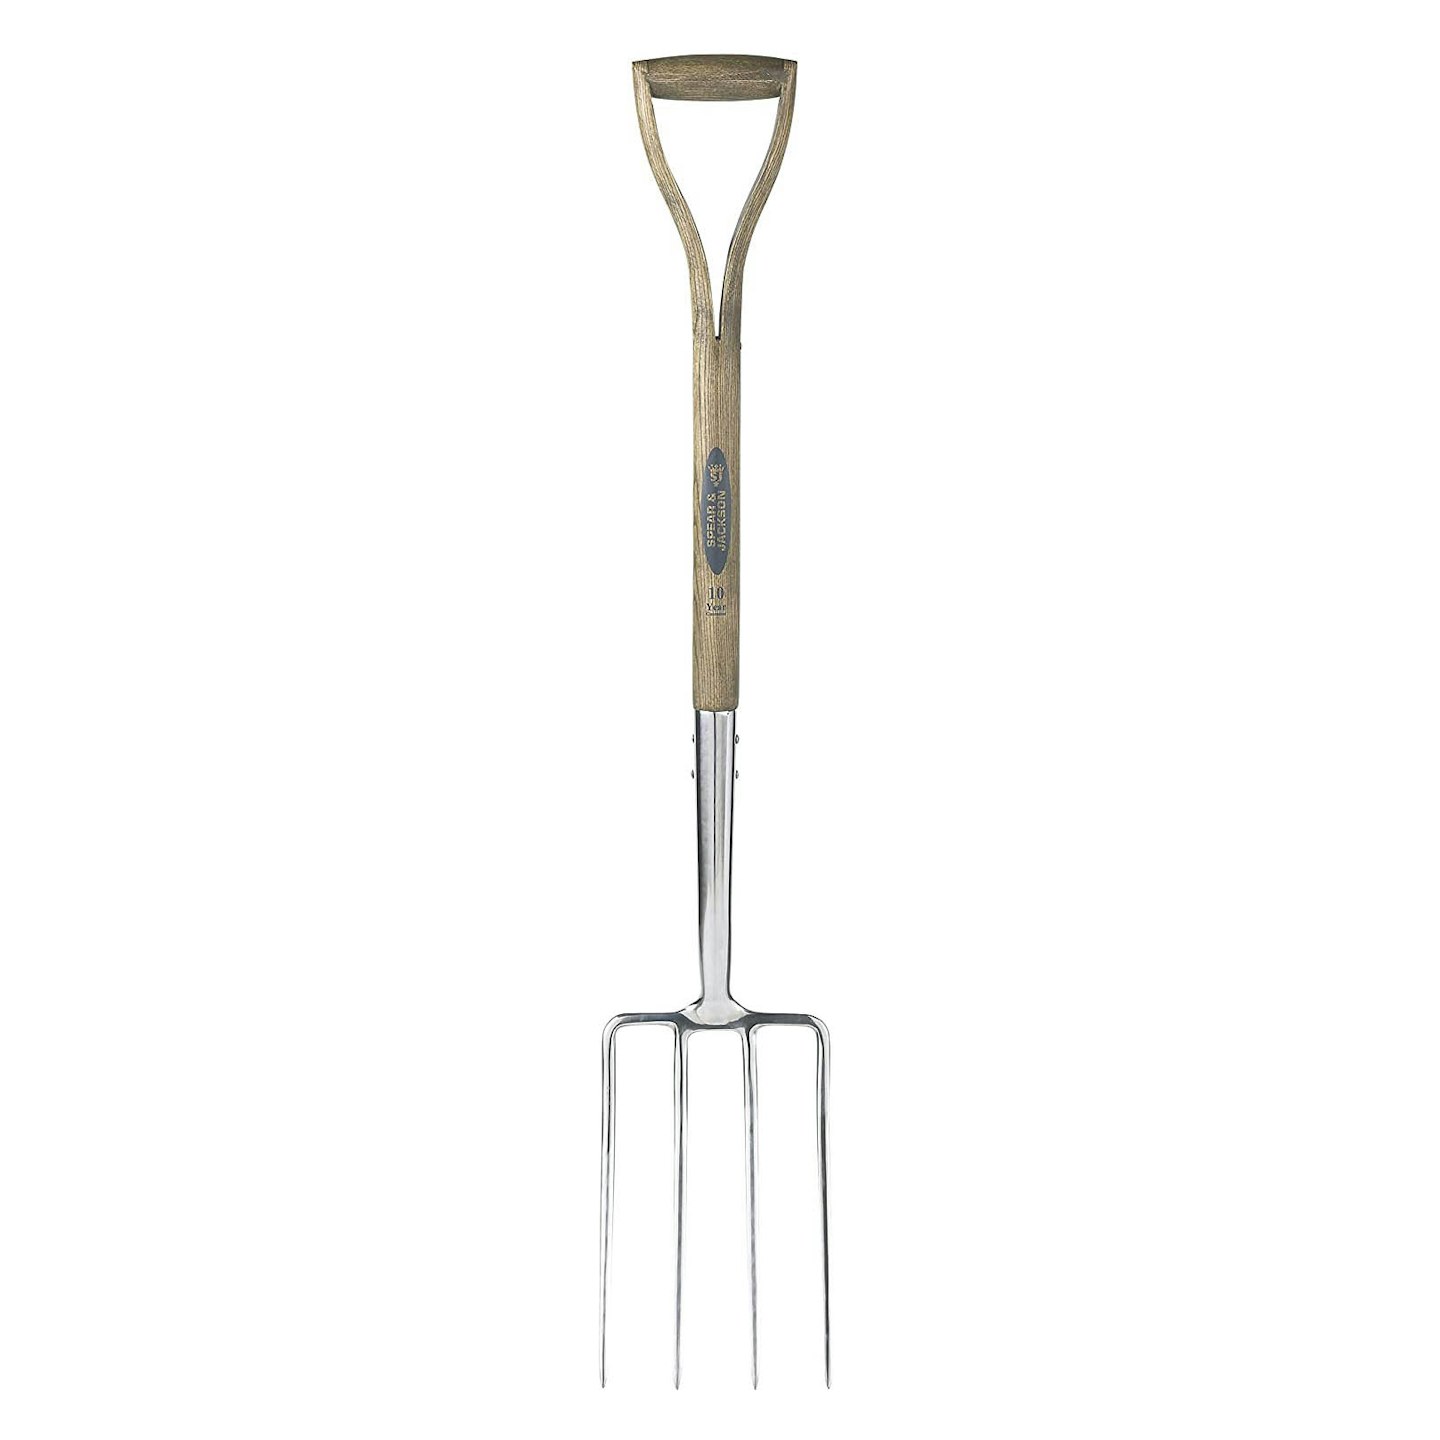 Spear & Jackson 4550DF Traditional Stainless Steel Digging Fork